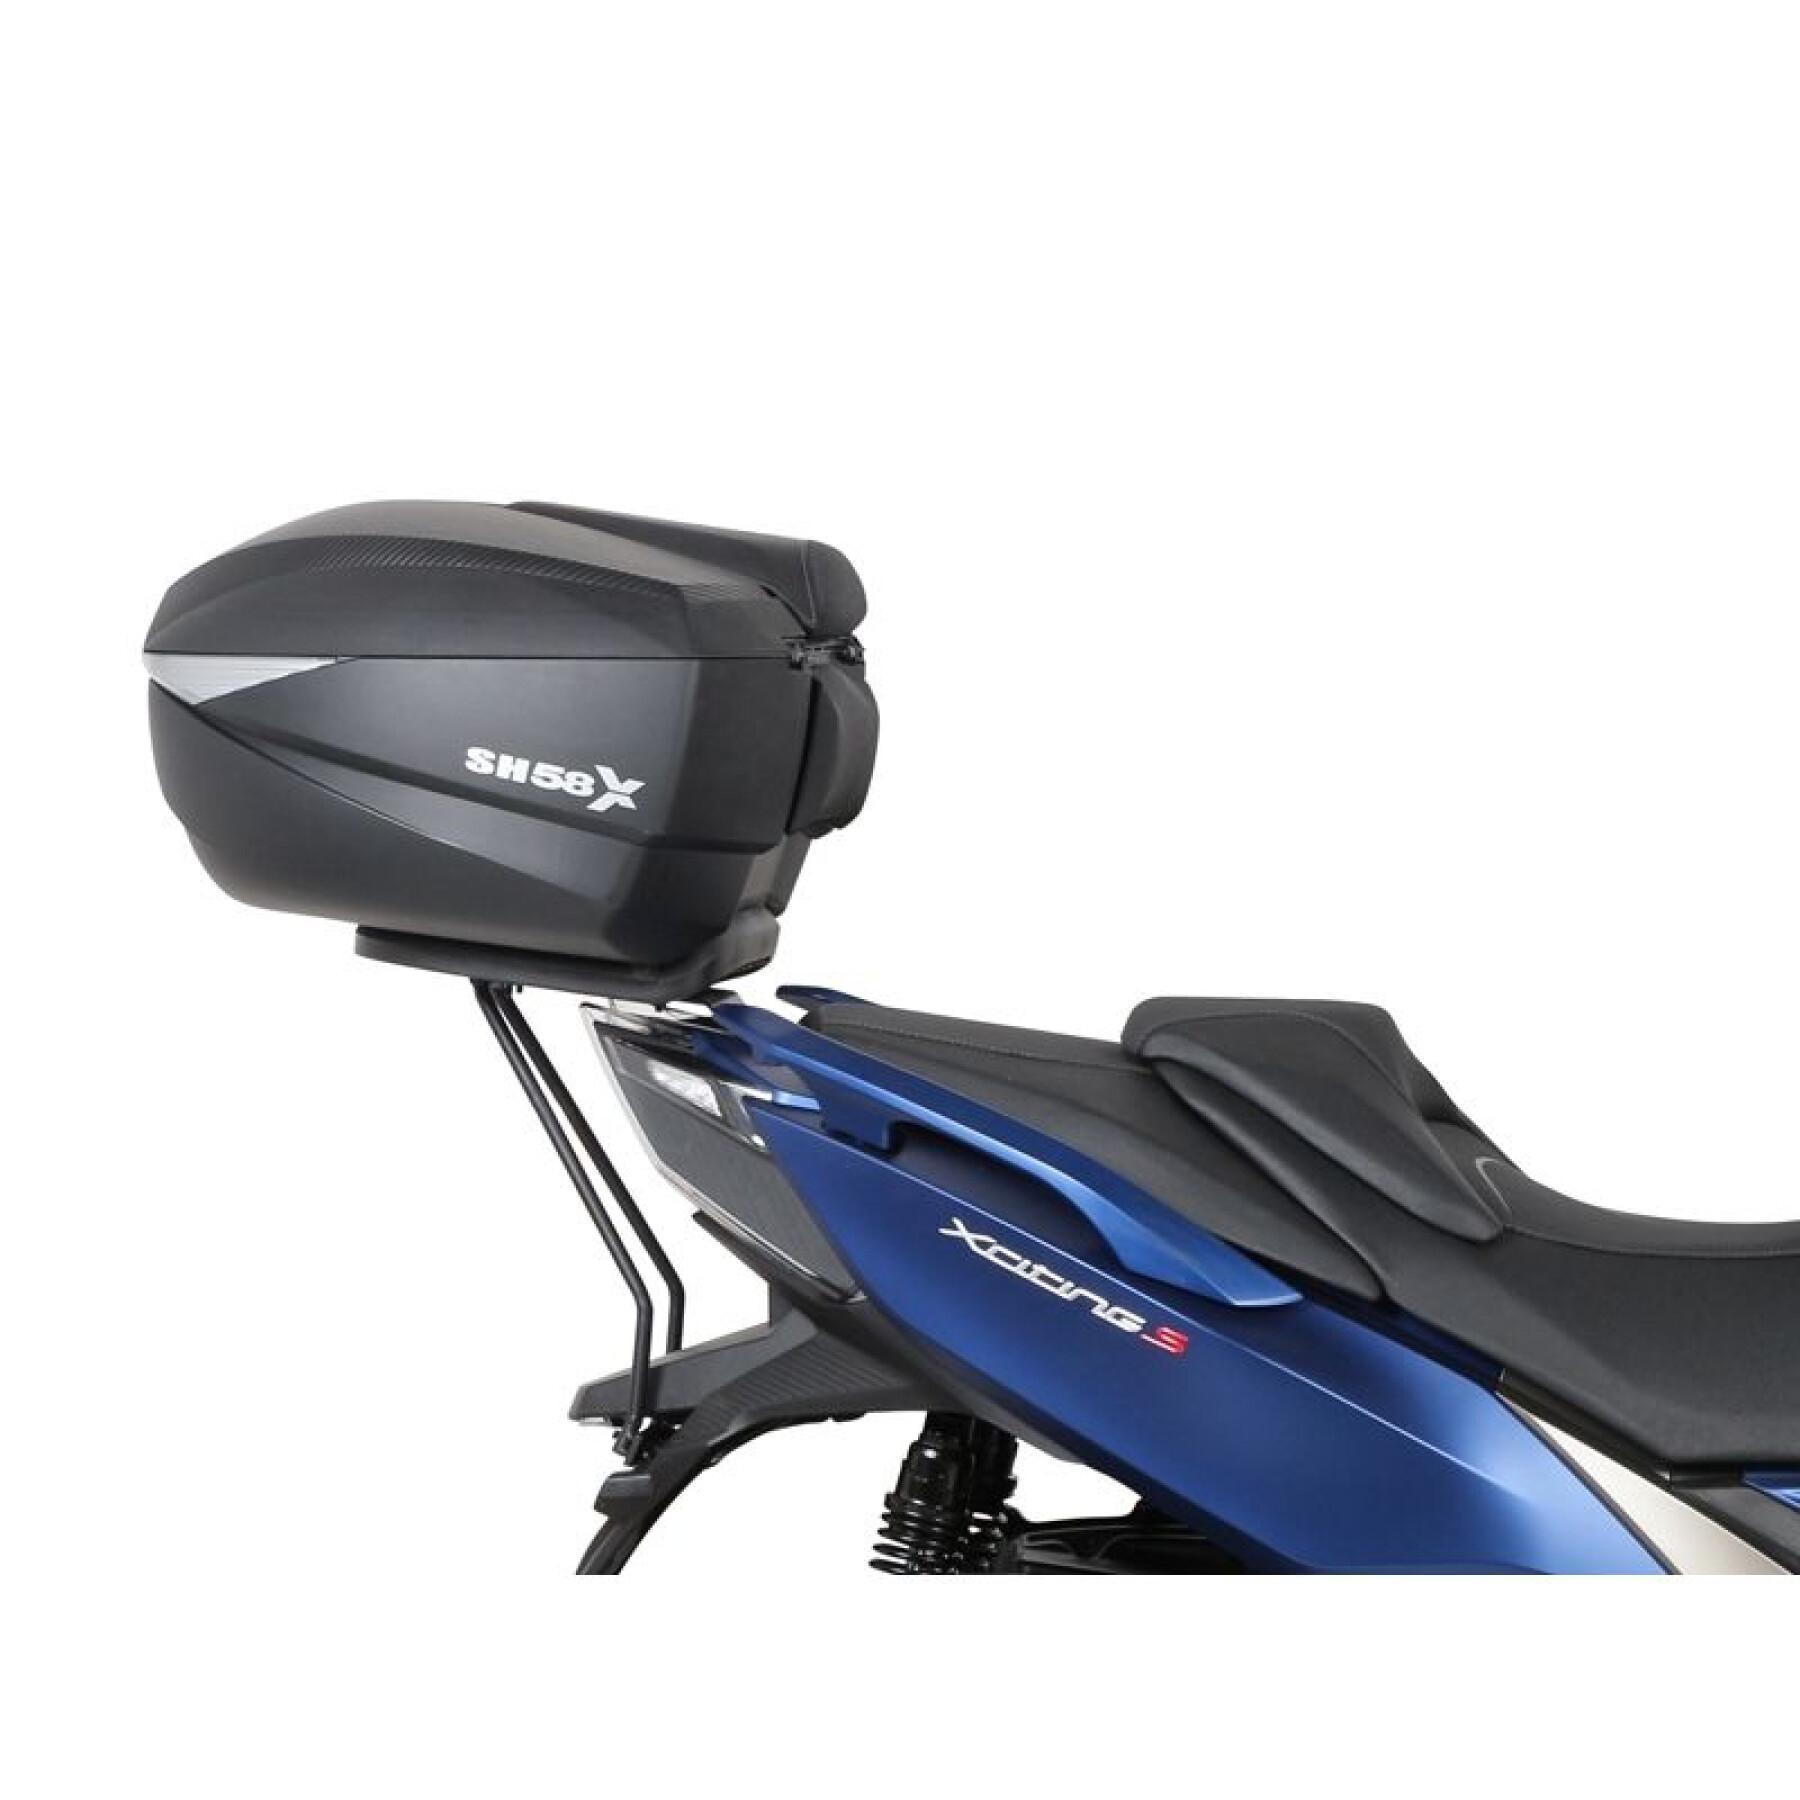 Suporte de Scooter top case Shad Kymco  Xciting 400S (18 a 21)